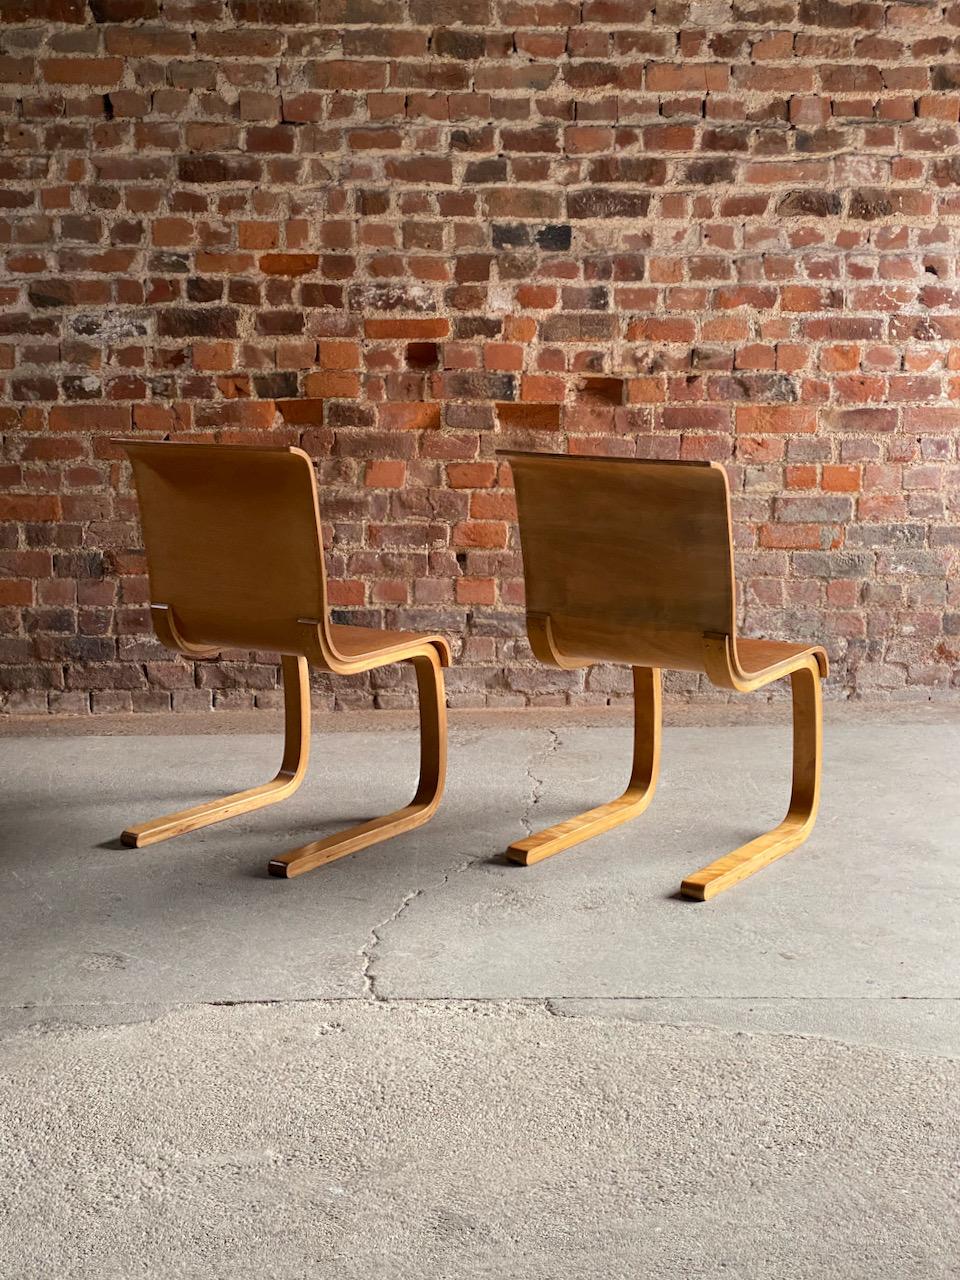 20th Century Alvar Aalto Model 21 Cantilever Side Chairs by Finmar, Pair, Finland, circa 1935 For Sale